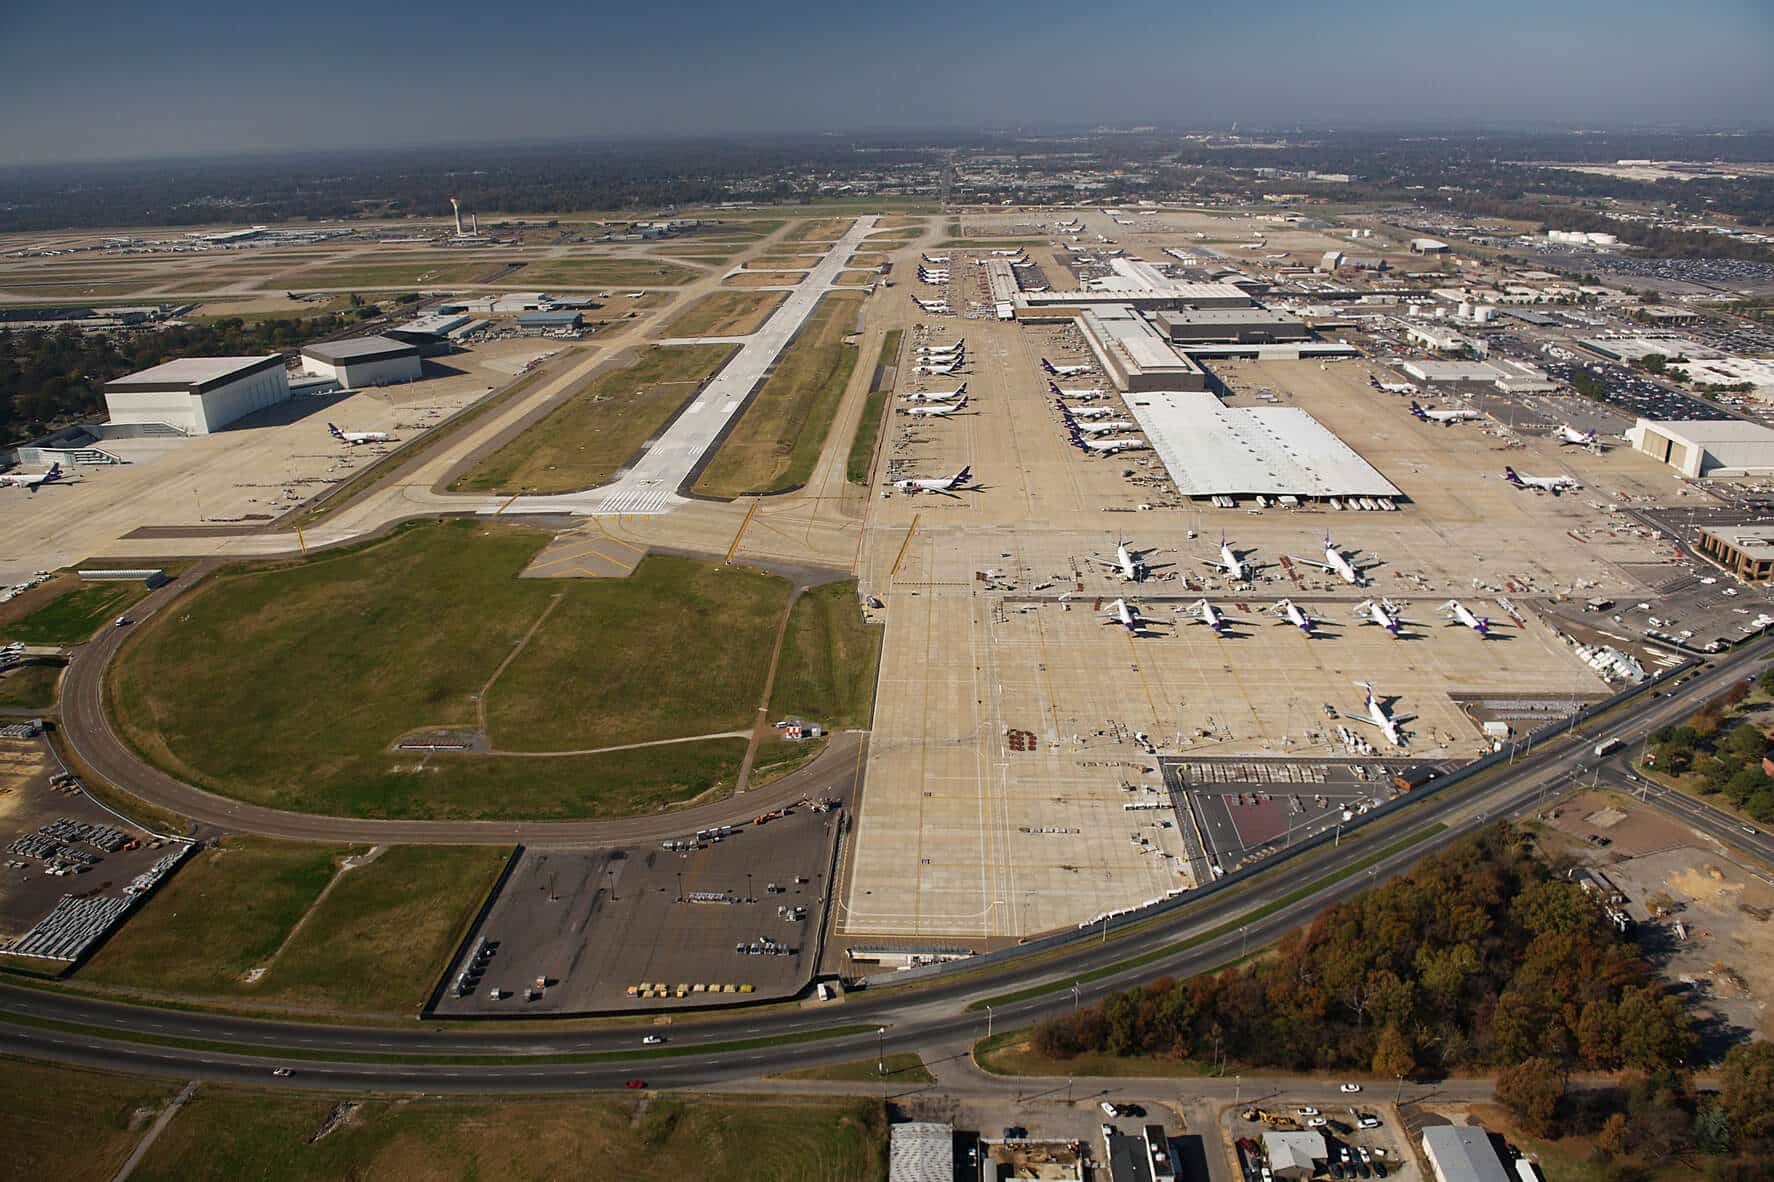 Aerial view of the Memphis Airport with a line of airplanes awaiting takeoff